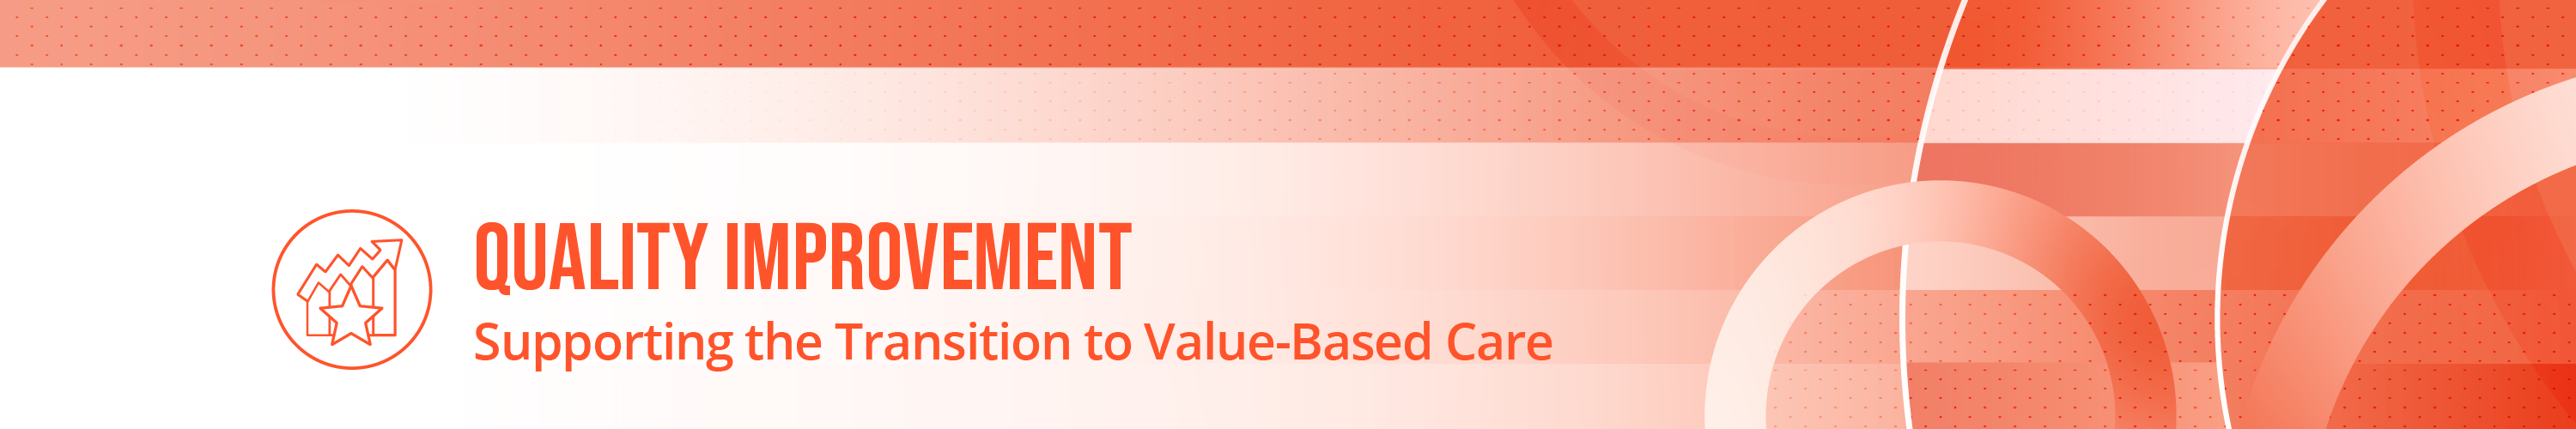 Quality Improvement: Supporting the Transition to Value-Based Care